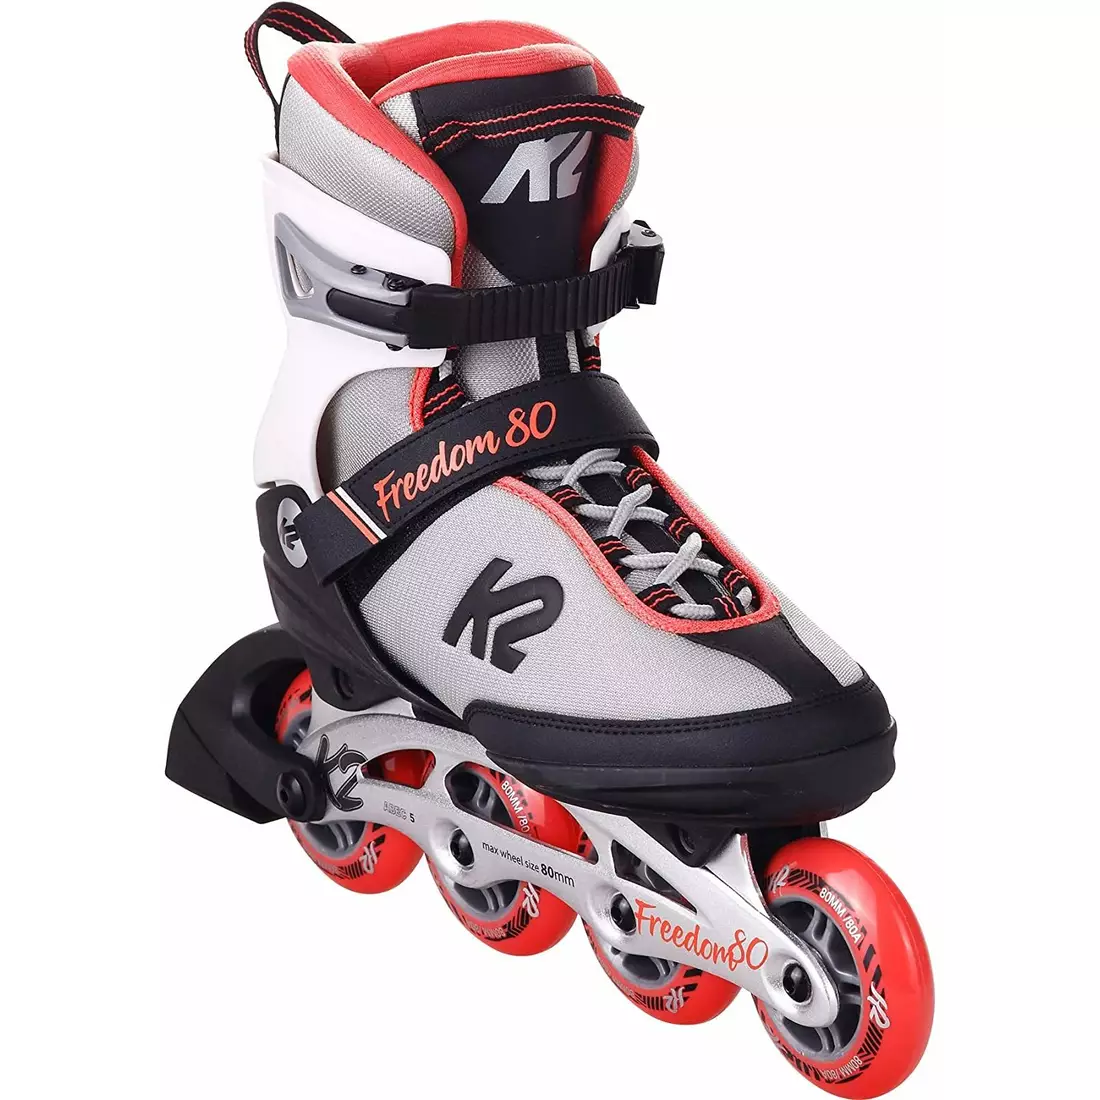 K2 Women's fitness rollerblades FREEDOM, white / coral 30E0342